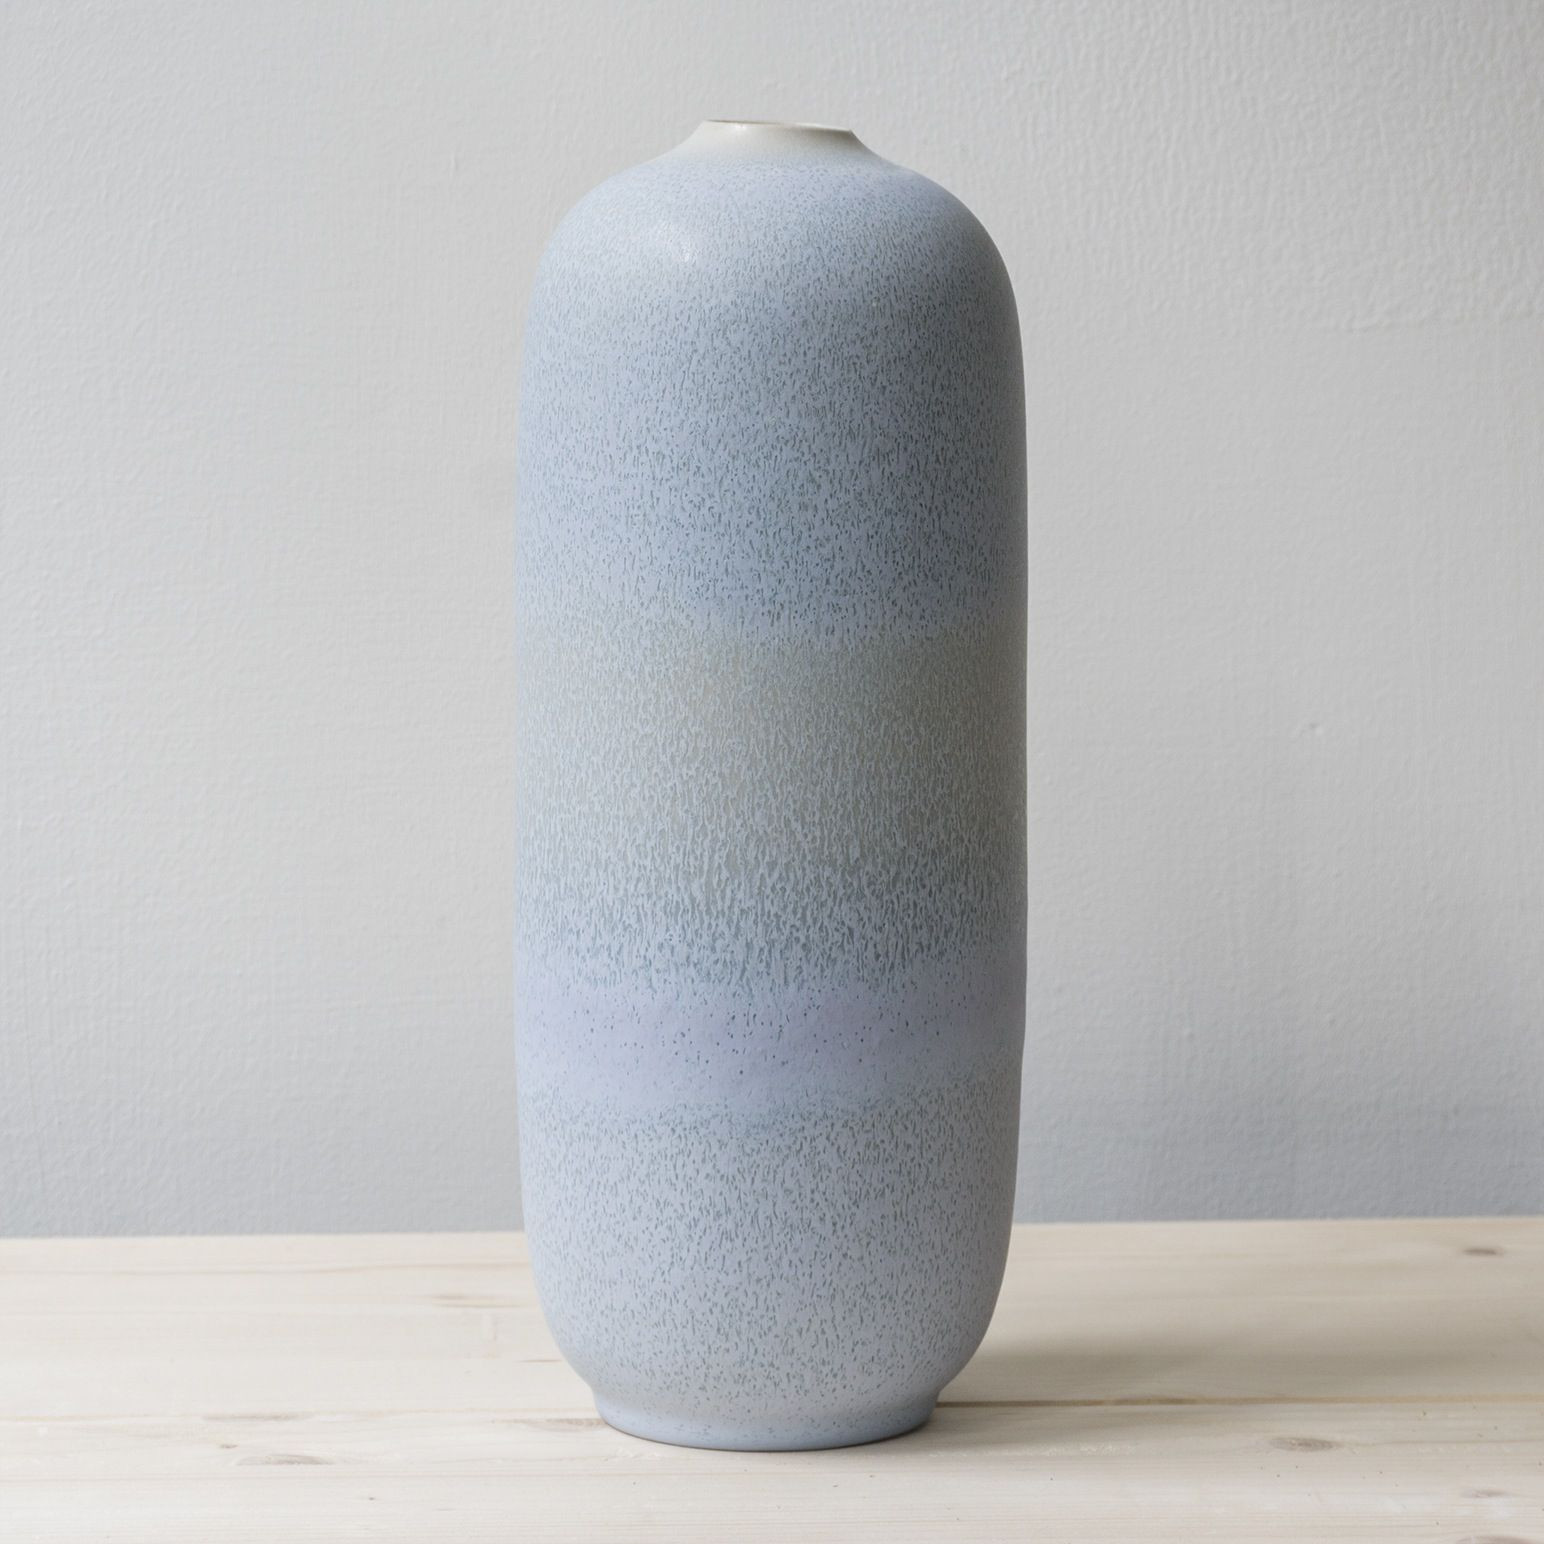 26 Lovable Tall Thin Blue Vase 2024 free download tall thin blue vase of unika bottle in frosted blue glaze stoneware and pottery throughout a large one of a kind vase in stoneware all unika vessels